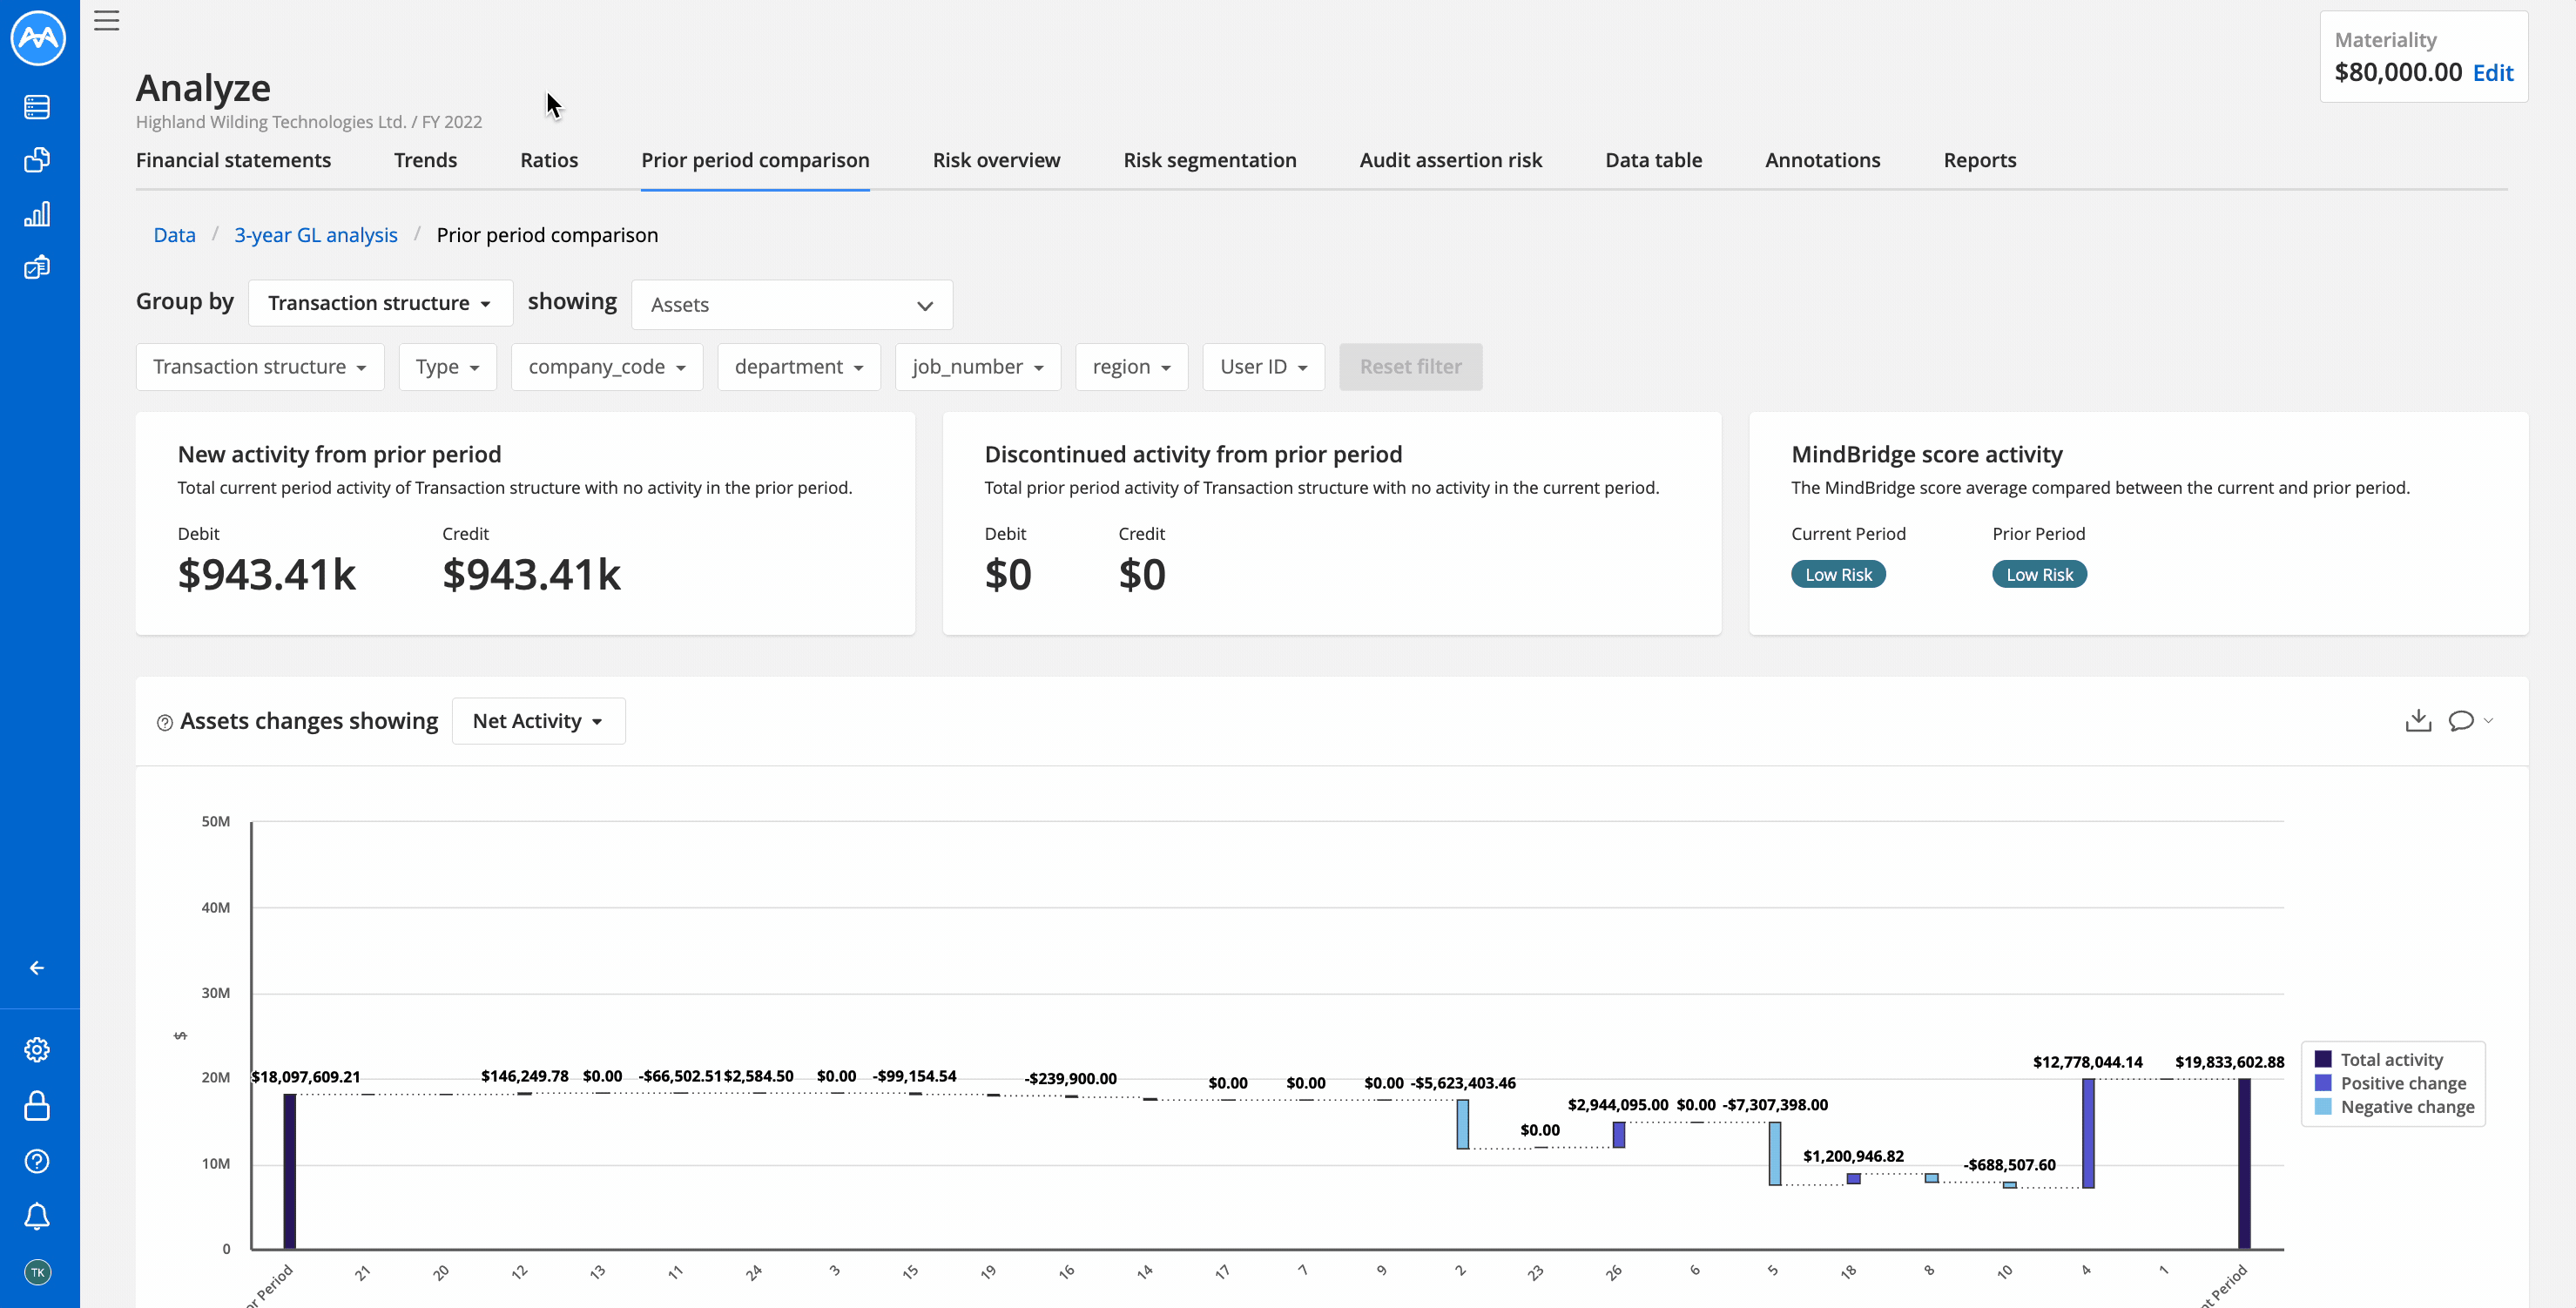 GIF showing how to use the account activity over time graph.gif